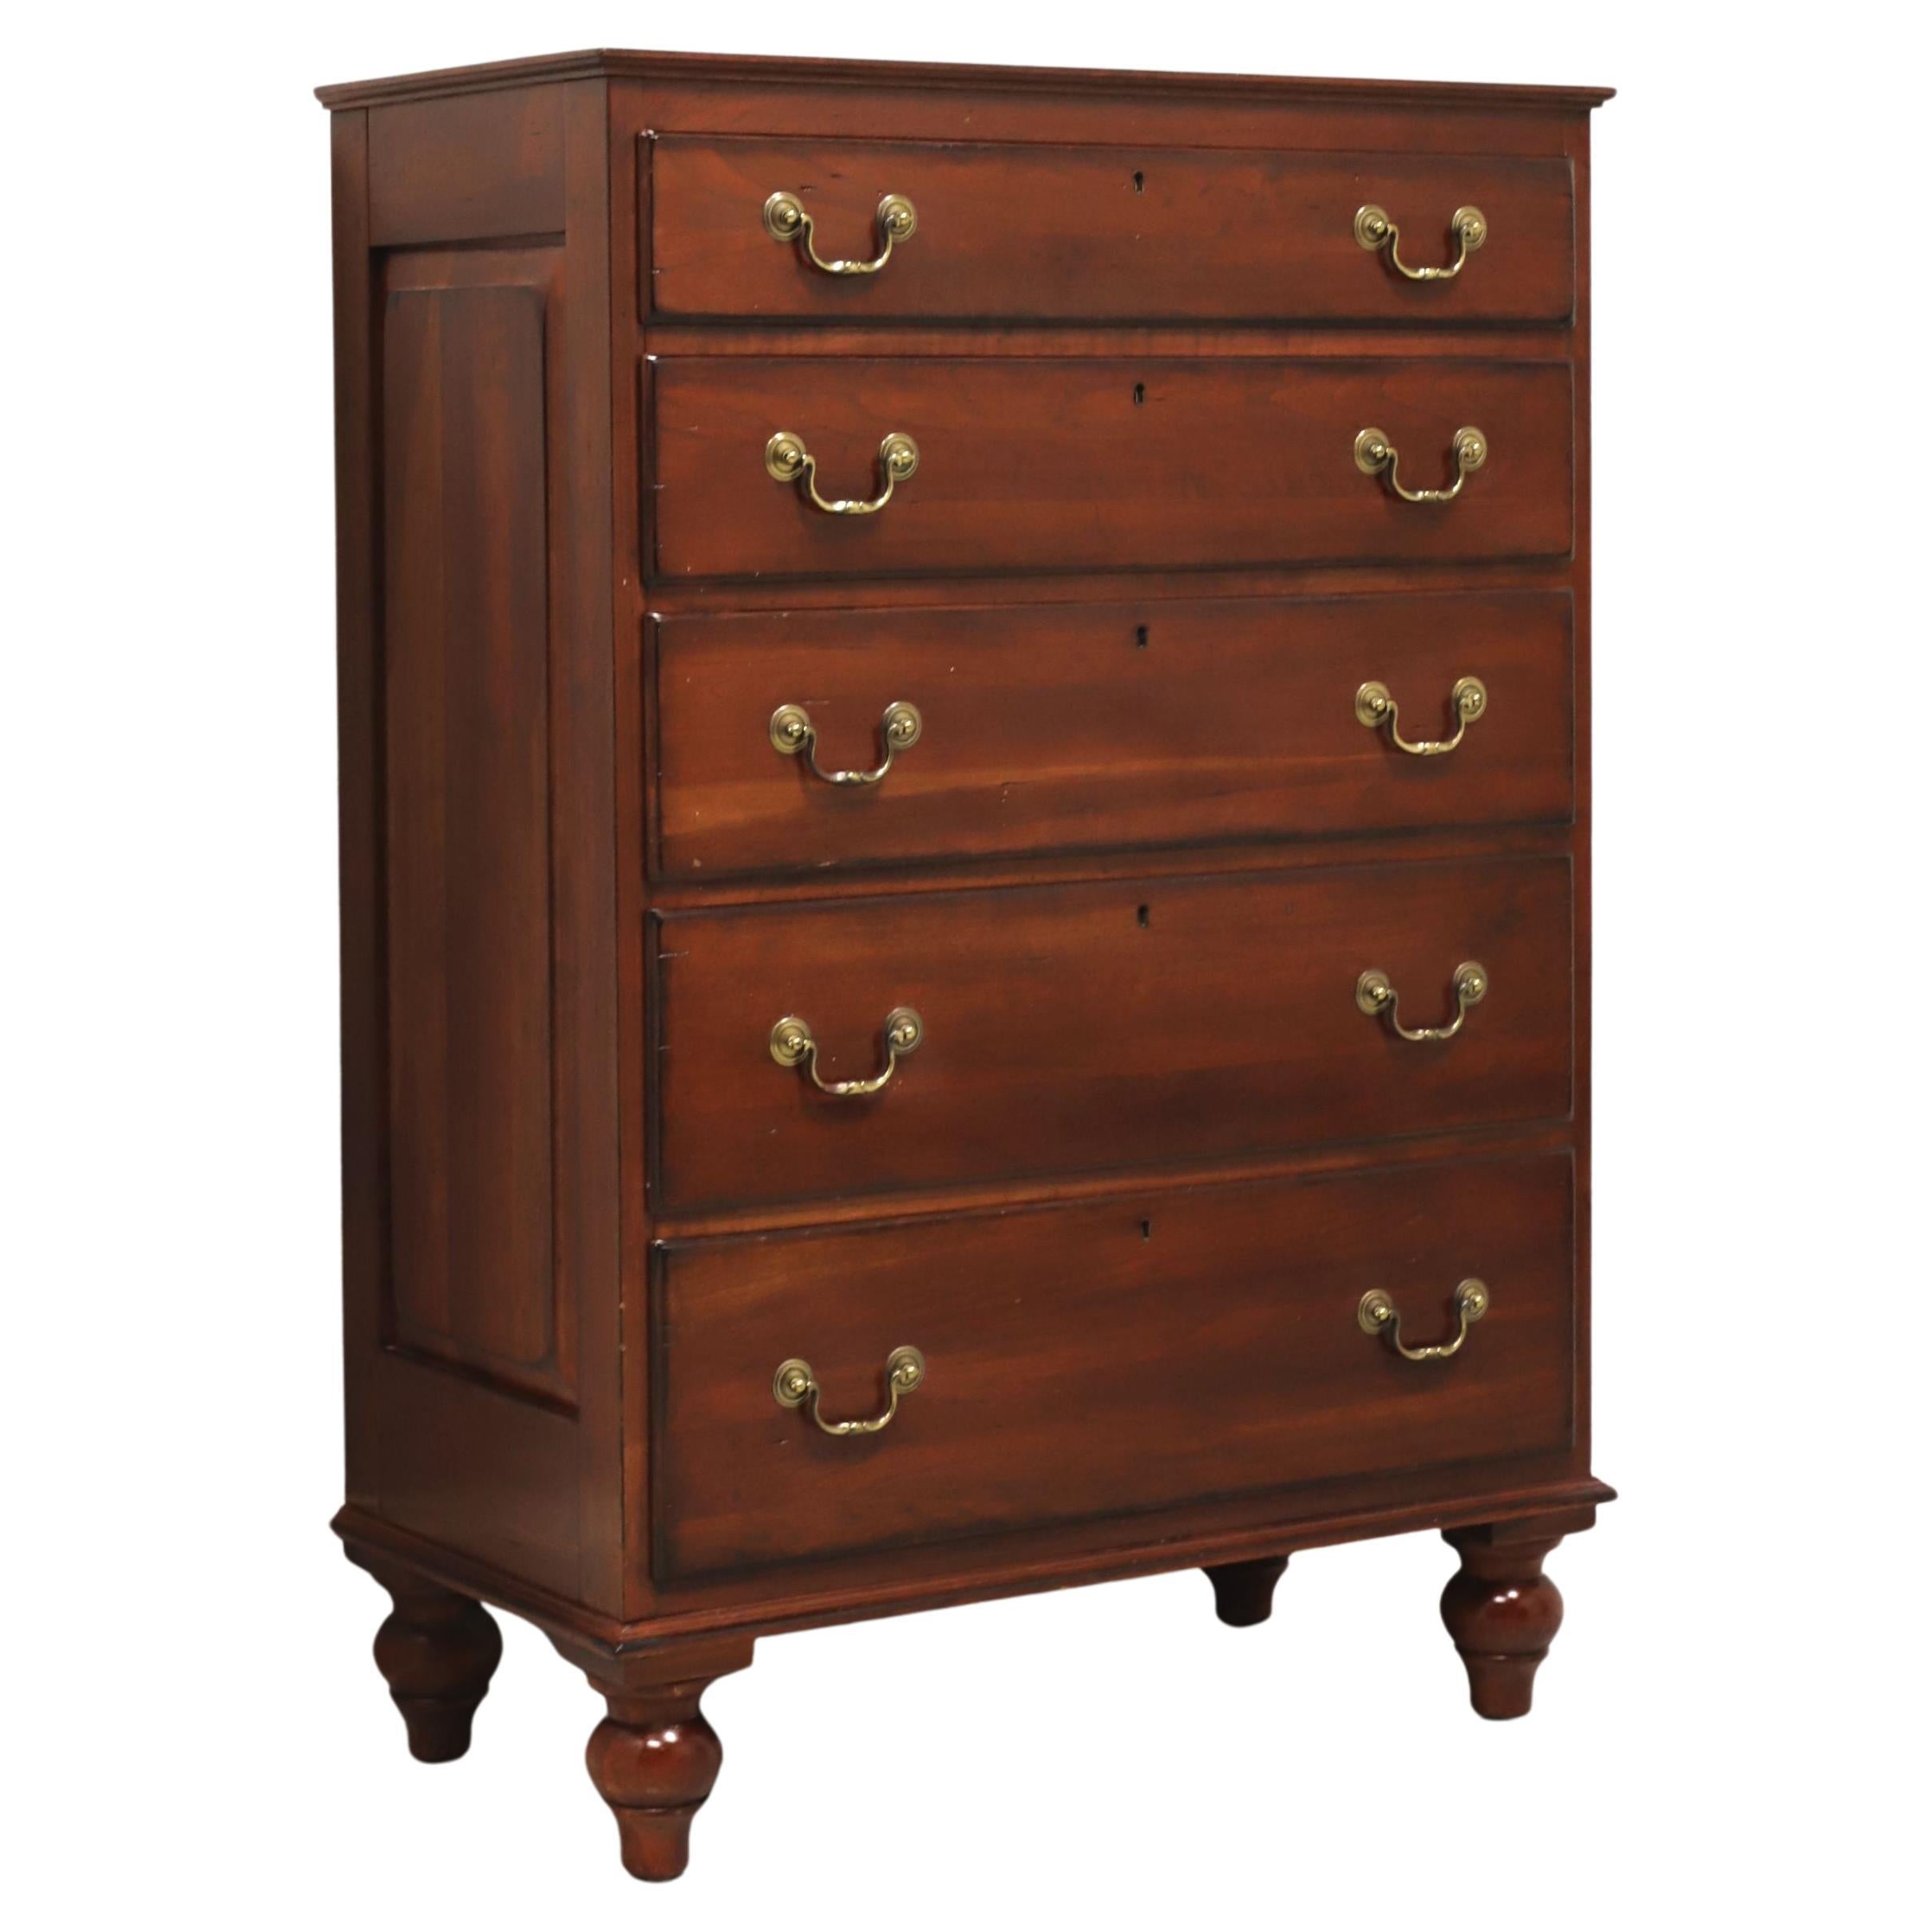 LEXINGTON Bob Timberlake Solid Cherry Chippendale Chest of Drawers